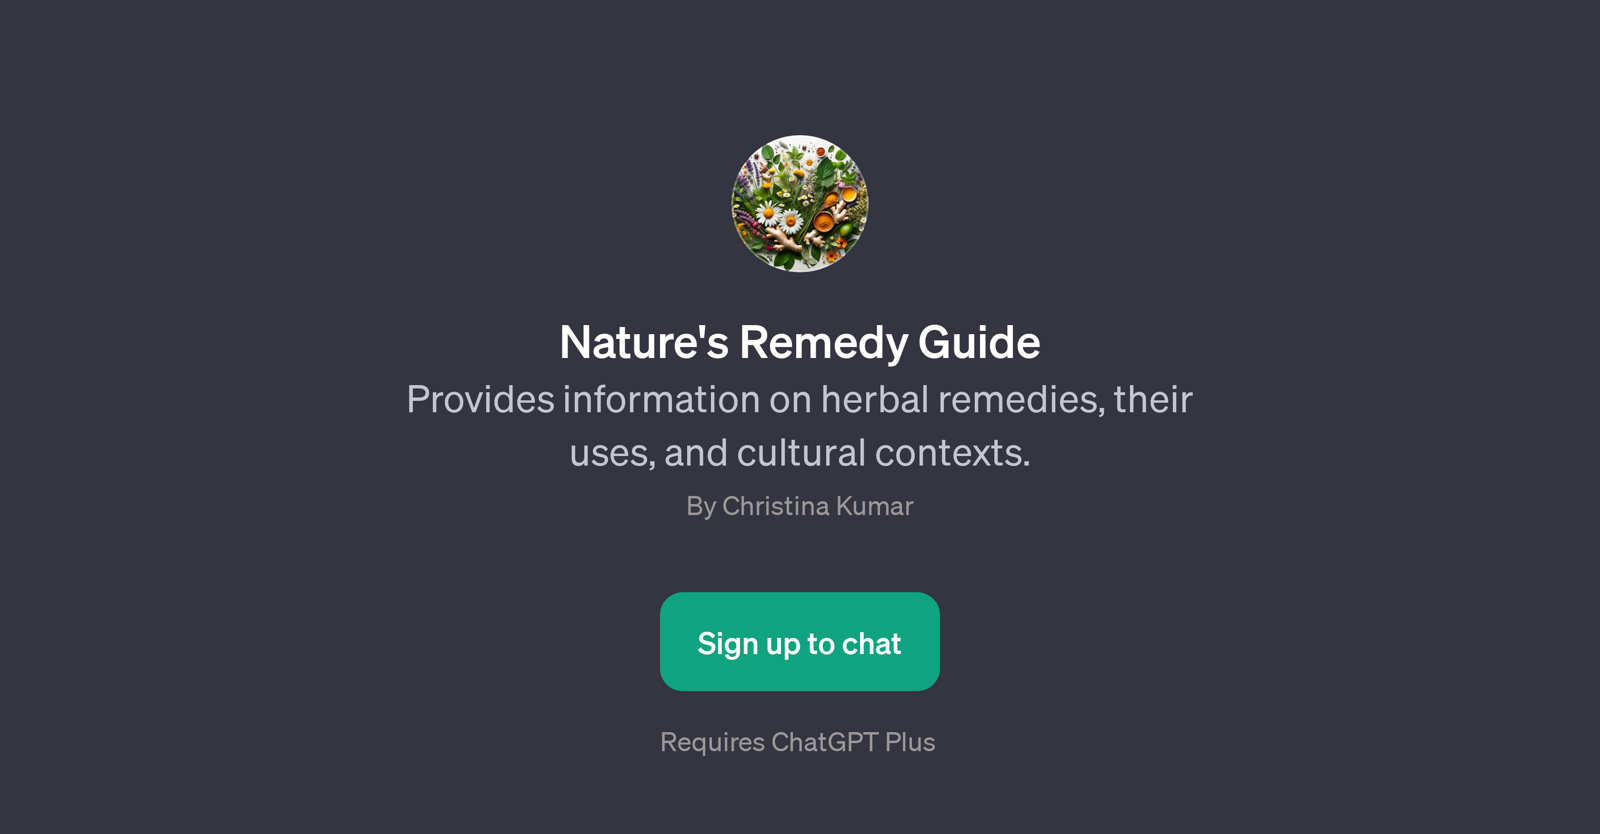 Nature's Remedy Guide website